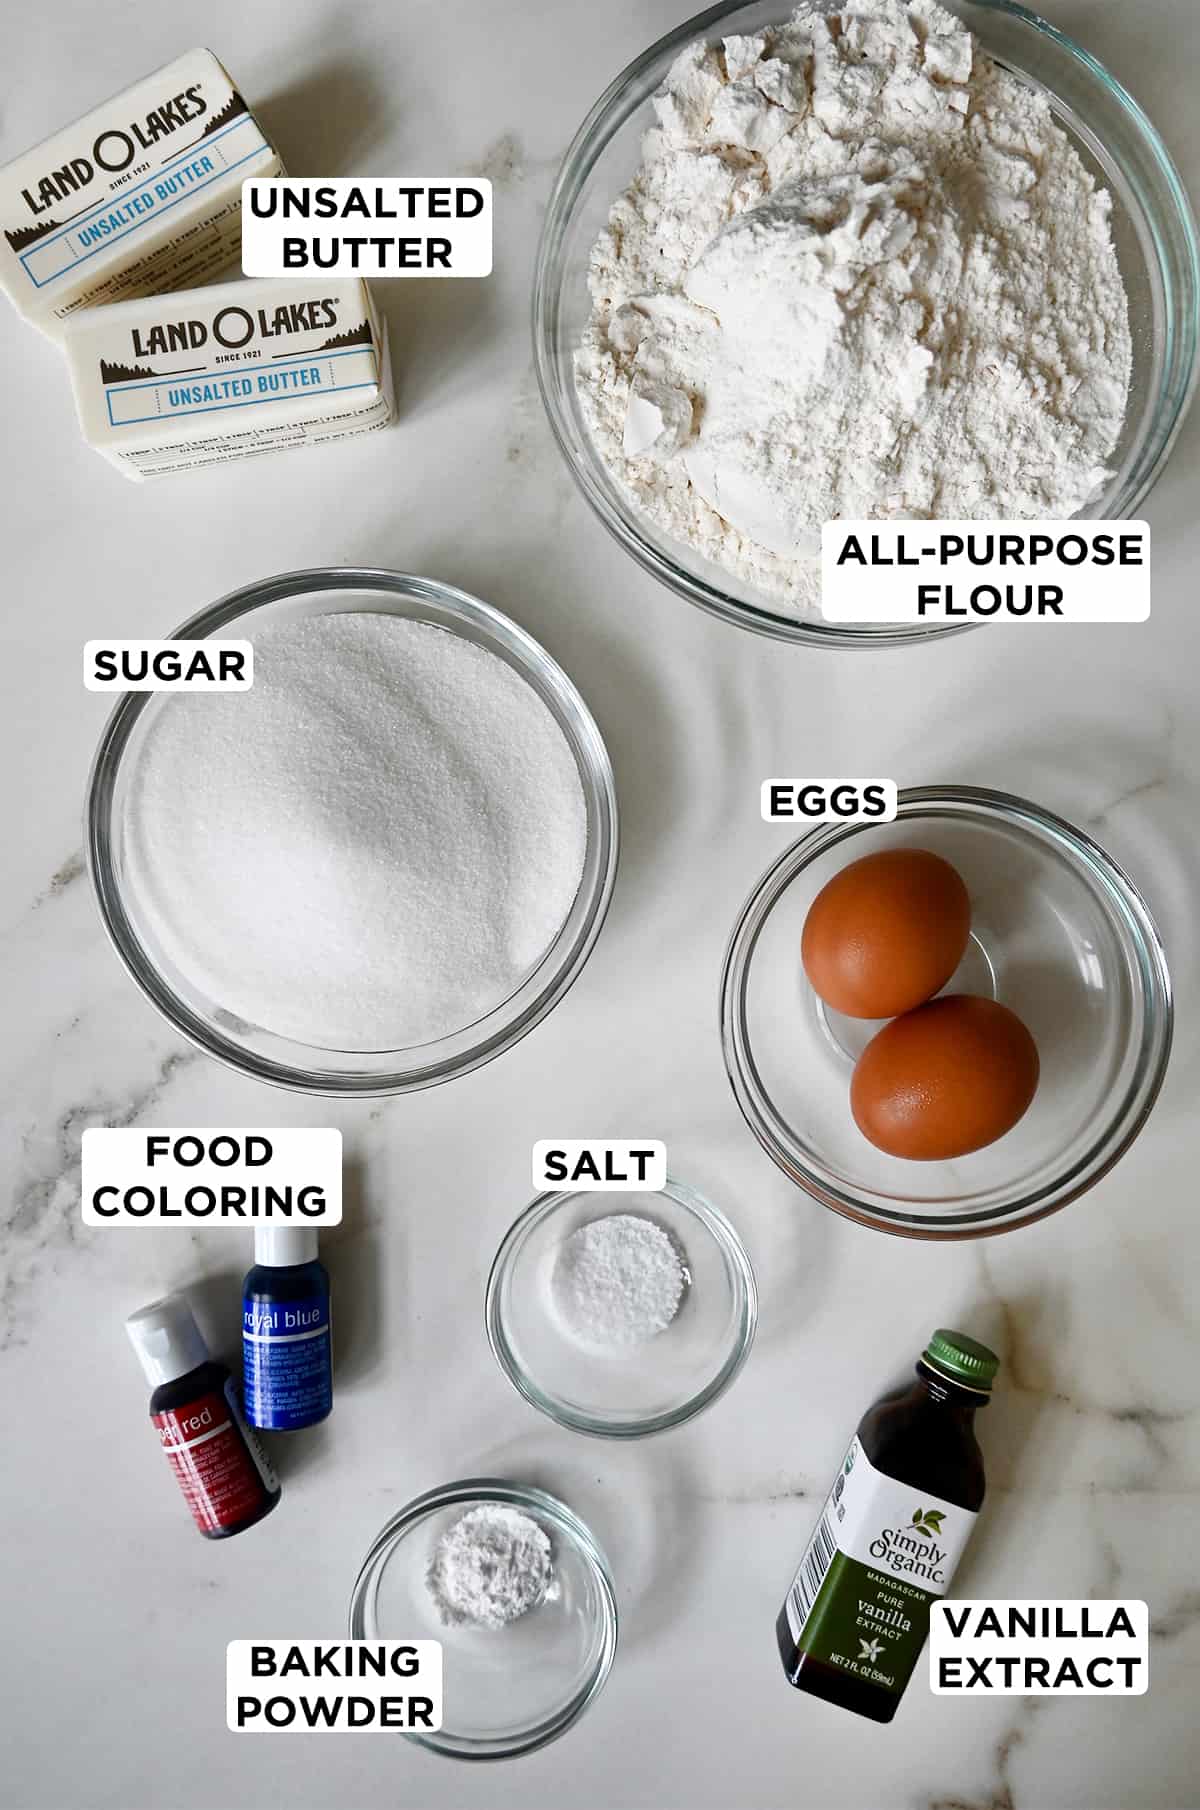 A top-down view of the ingredients needed to make pinwheel cookies, including butter, all-purpose flour, eggs, salt, vanilla extract, baking powder, sugar and food coloring.